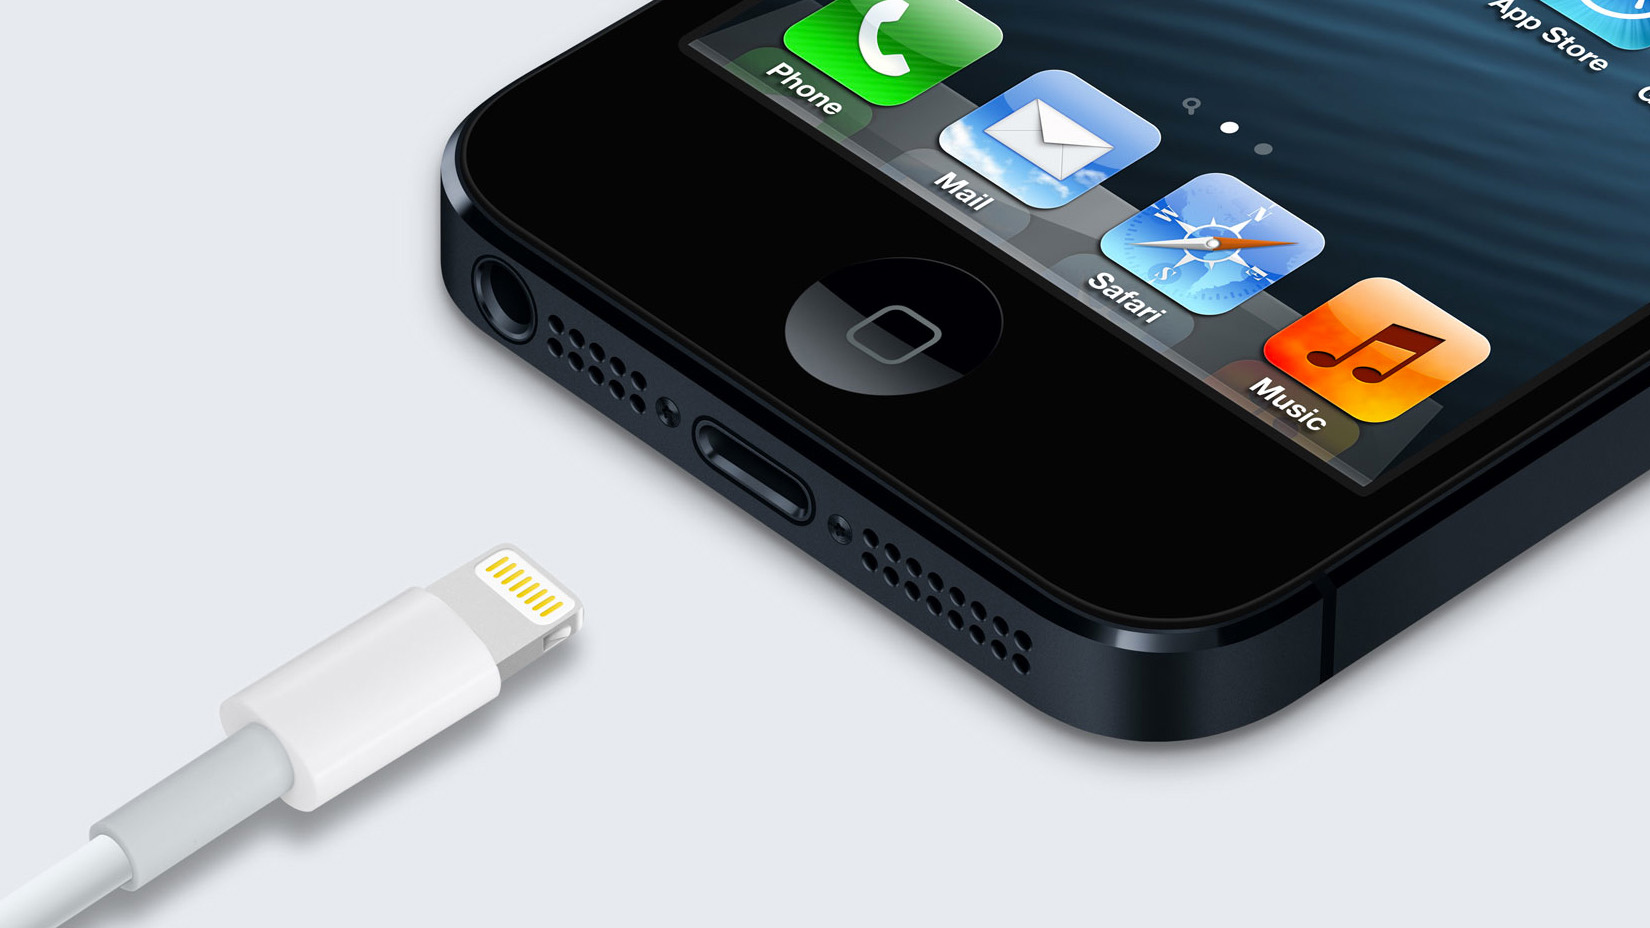 Top 10 Lightning accessories iPhone, iPad and iPod | Blog